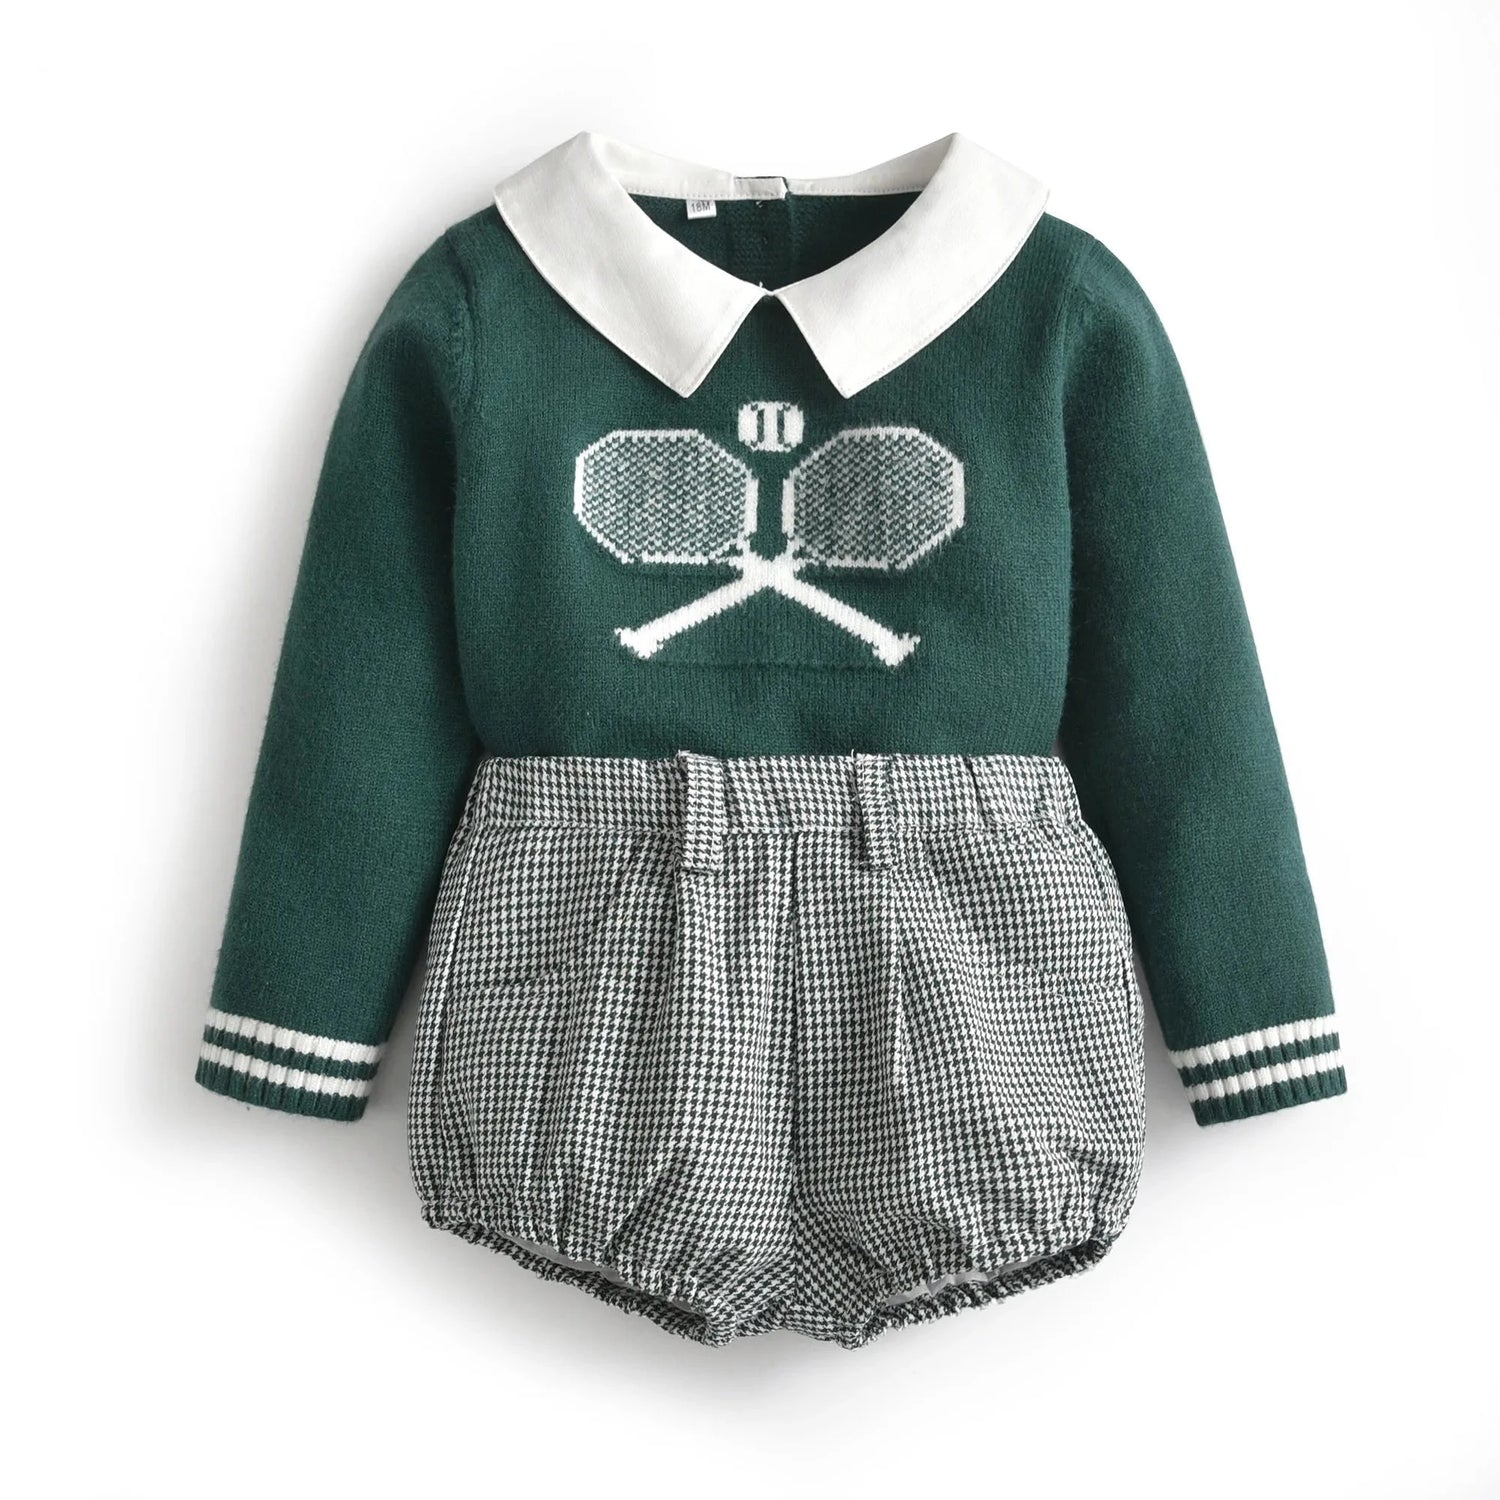 BABY TENNIS CLUB SWEATER AND SHORTS SET - Peachy Bloomers